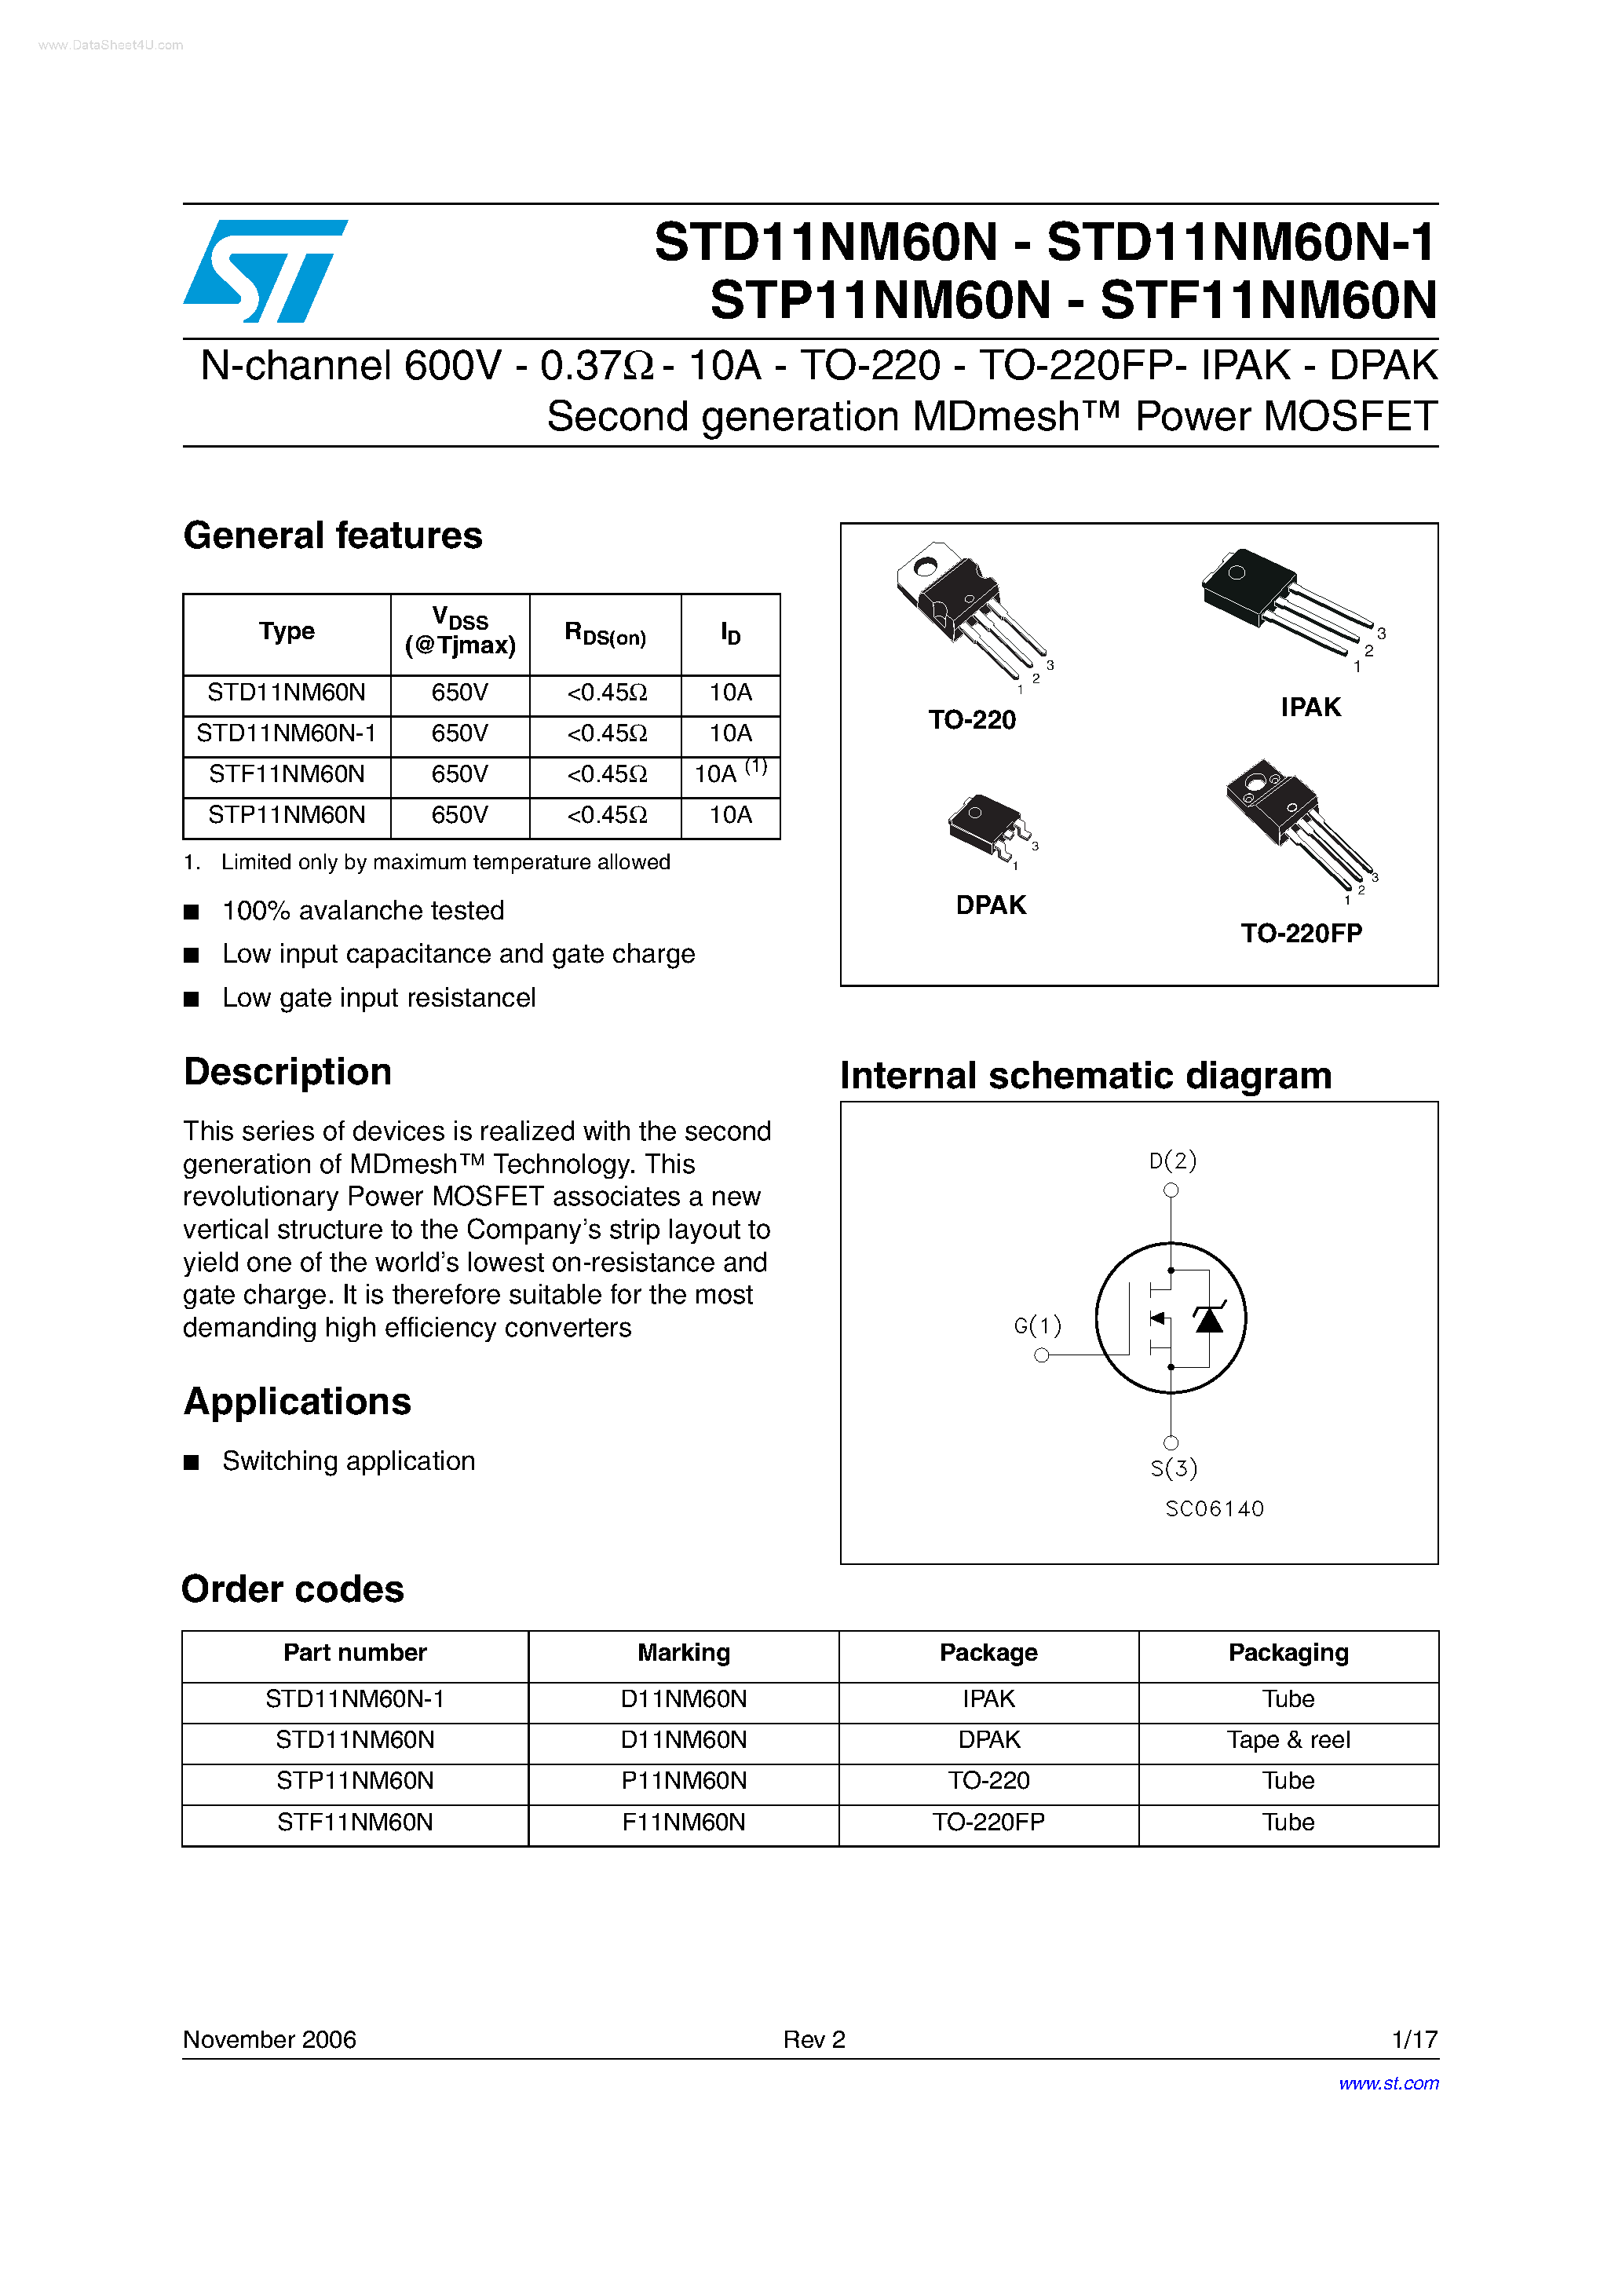 Datasheet STD11NM60N - N-channel Second generation MDmesh Power MOSFET page 1